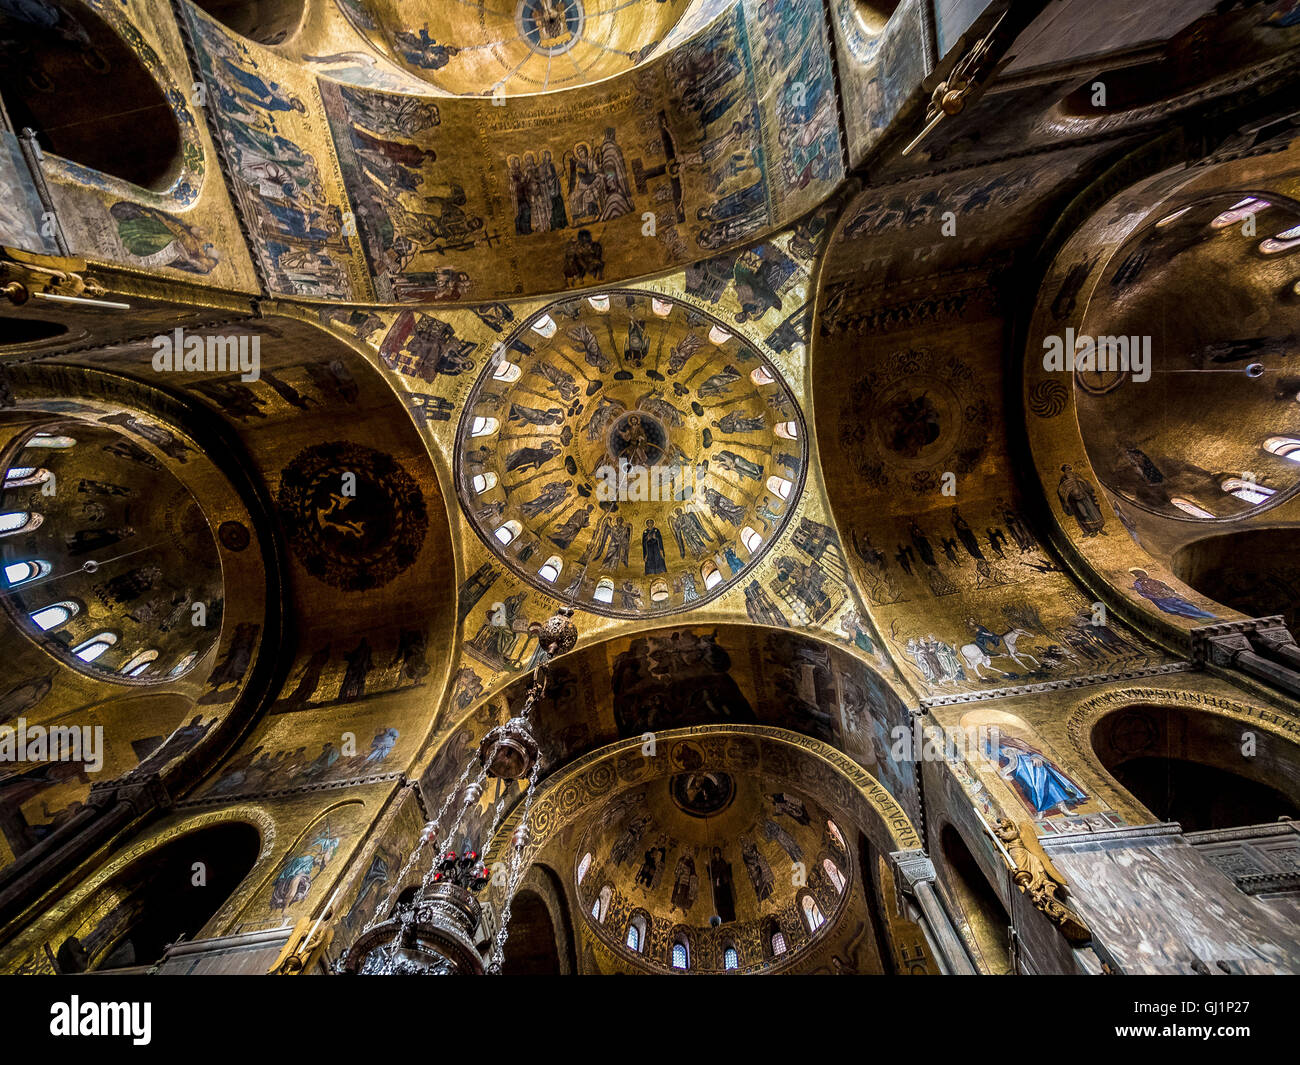 Interior of St Mark's basilica showing the 5 golden mosaiced ceiling domes. Venice, Italy. Stock Photo